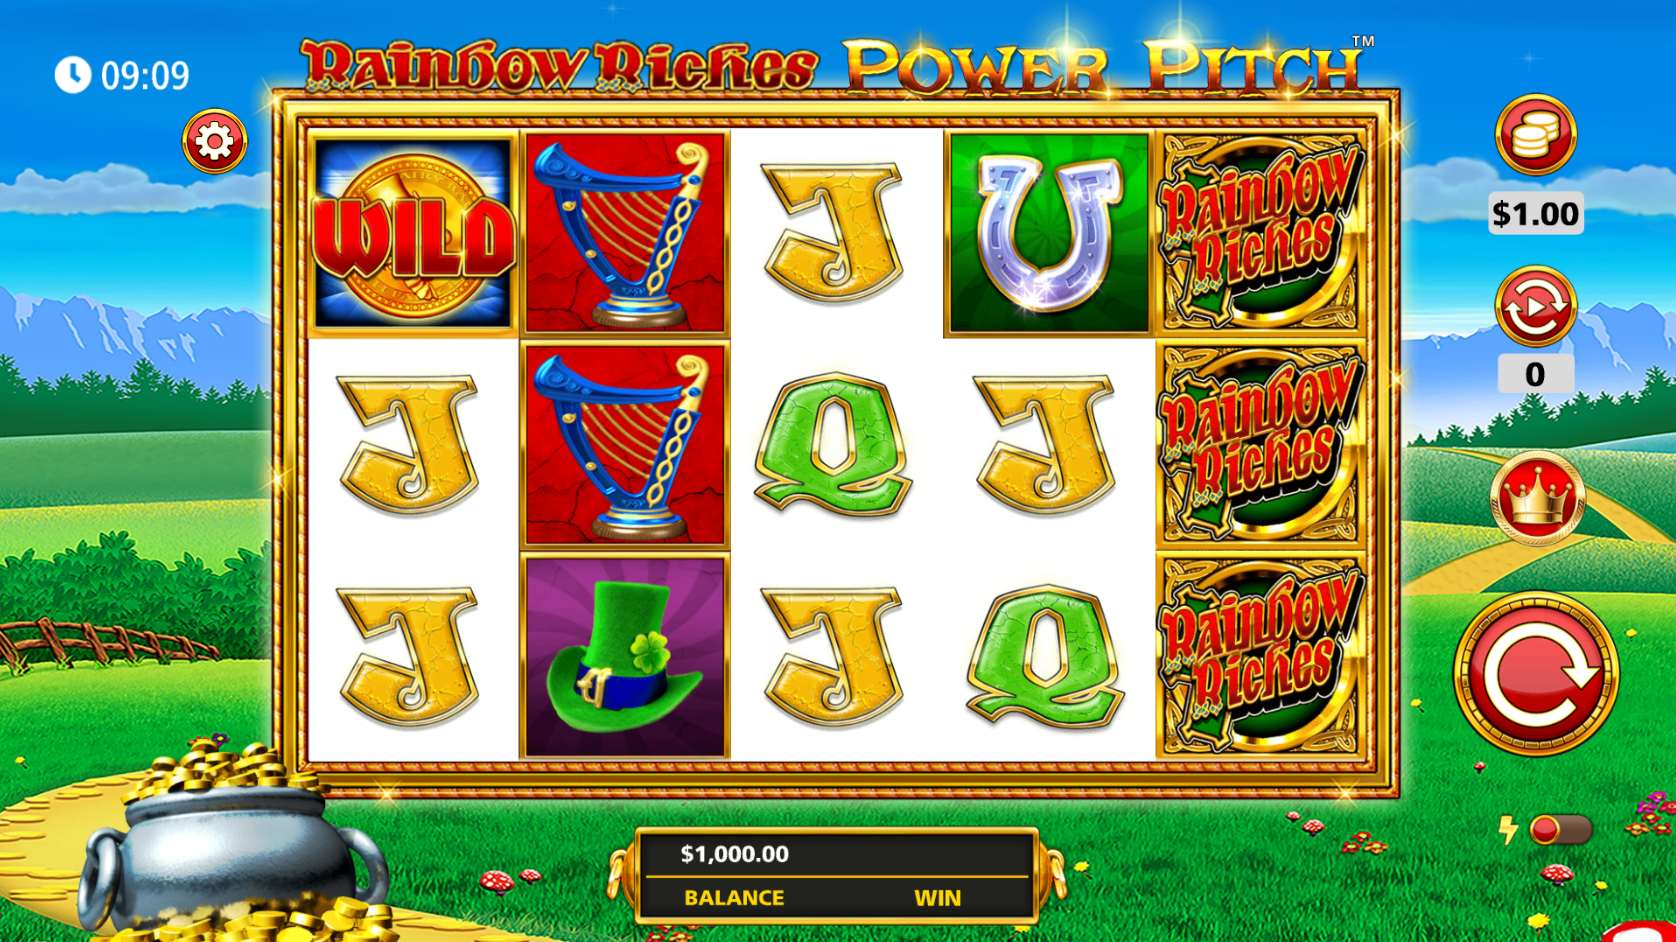 Rainbow Riches Power Pitch Base Game